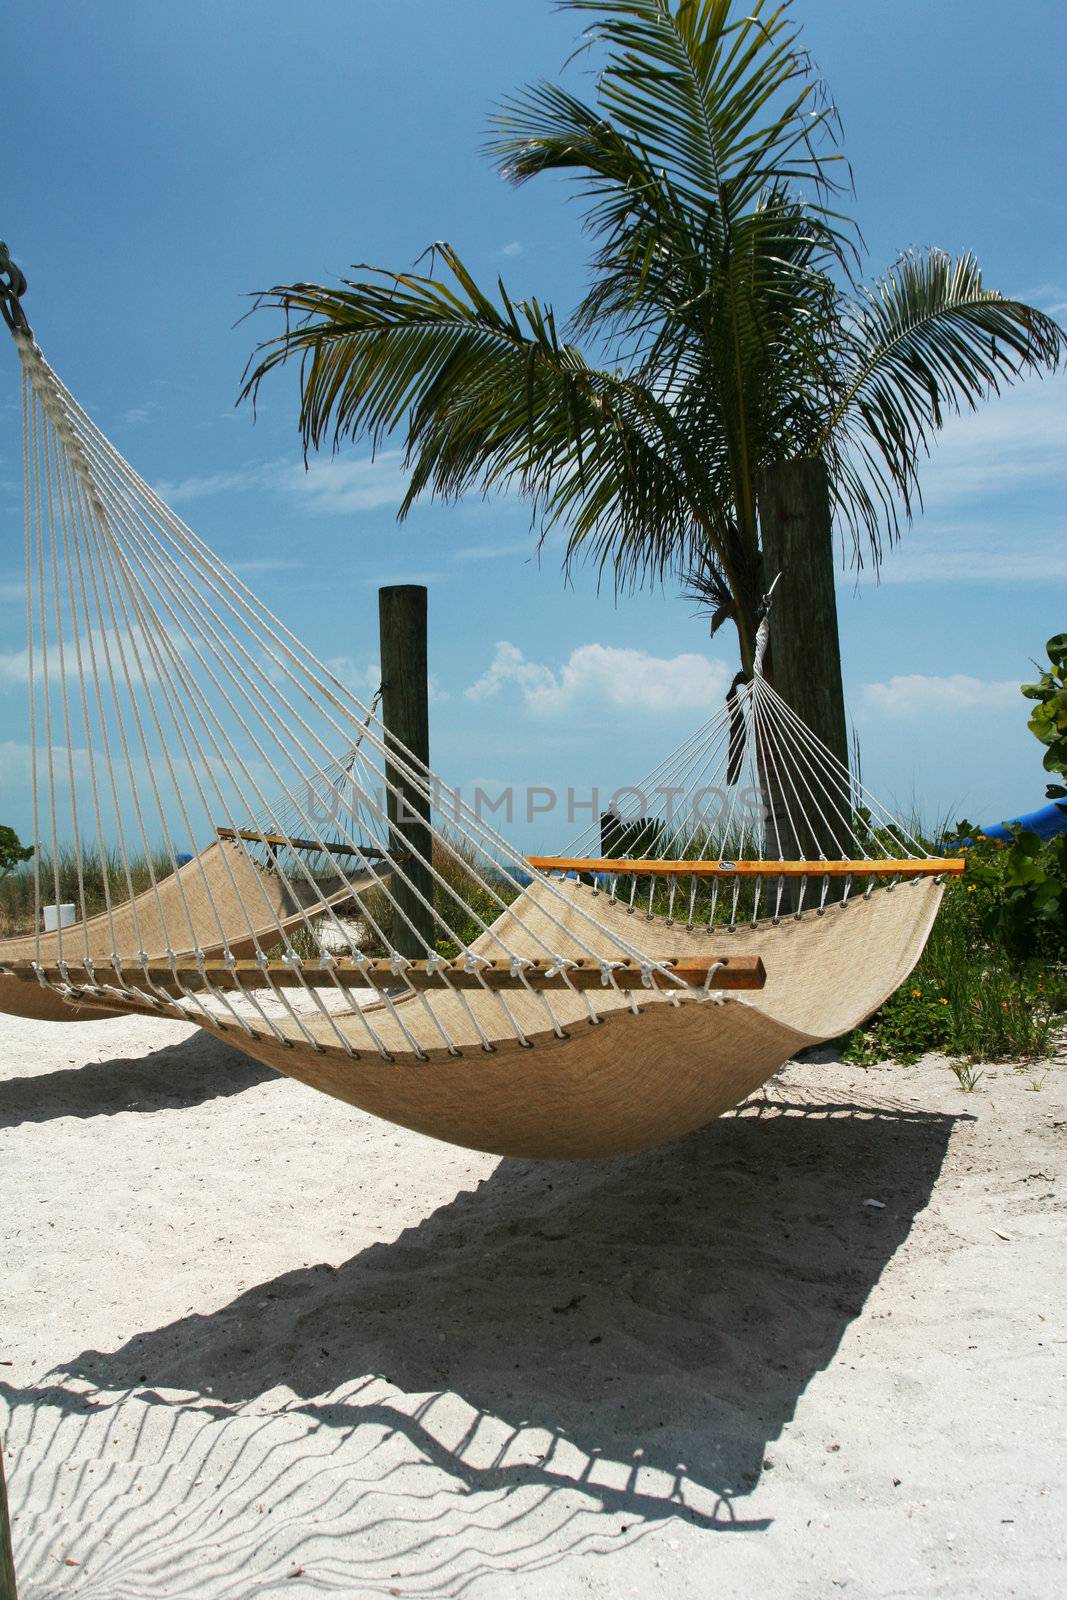 A hammock hanging in a palmtree on a tropical beach